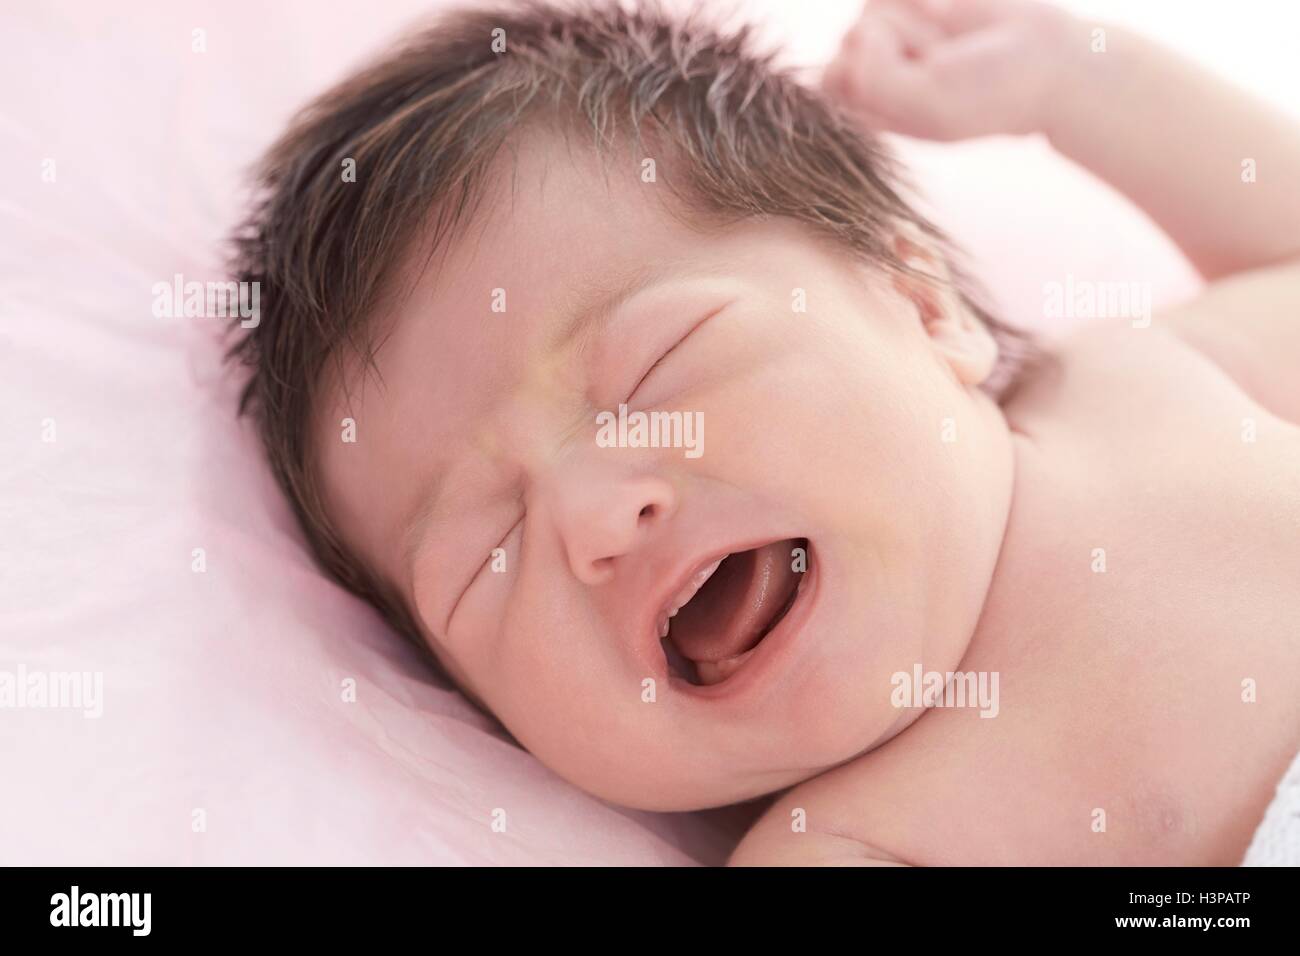 MODEL RELEASED. Newborn baby girl with eyes closed. Stock Photo